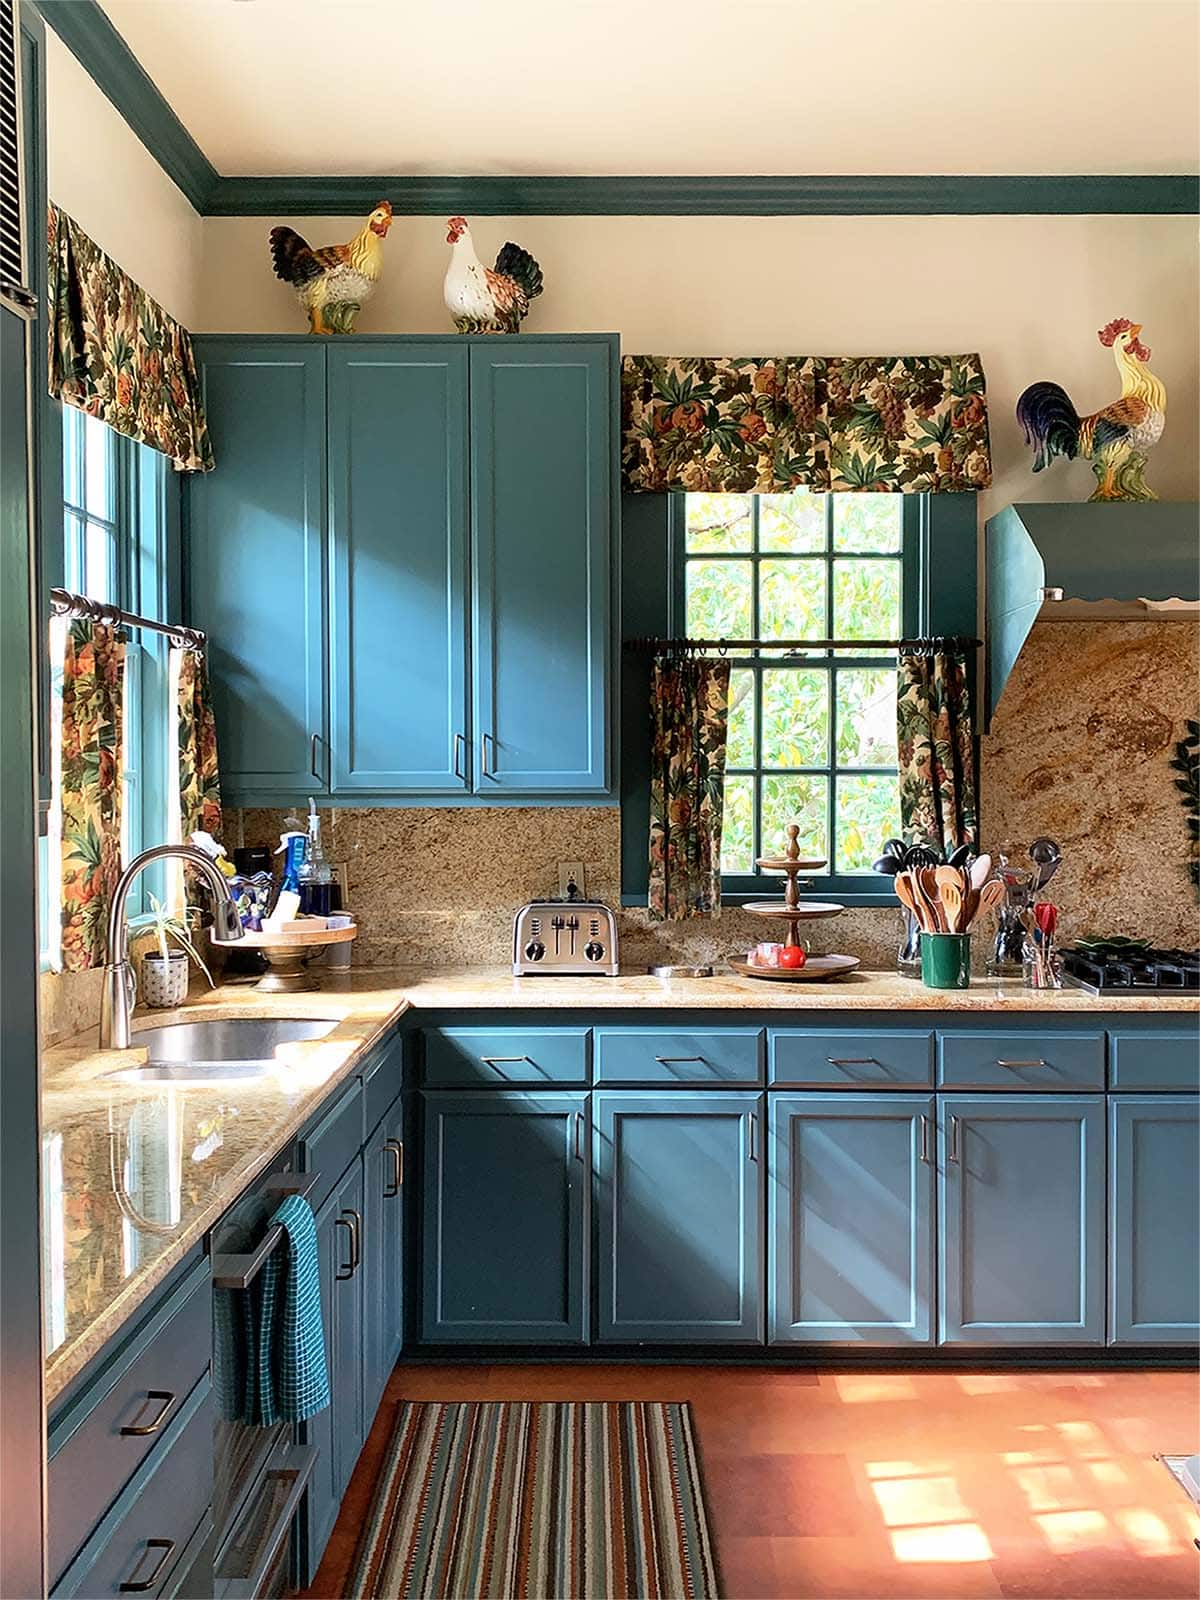 english-style-farmhouse-kitchen-cabinets-in-sherwin-williams-riverway-paint-color-alamo-heights-painter